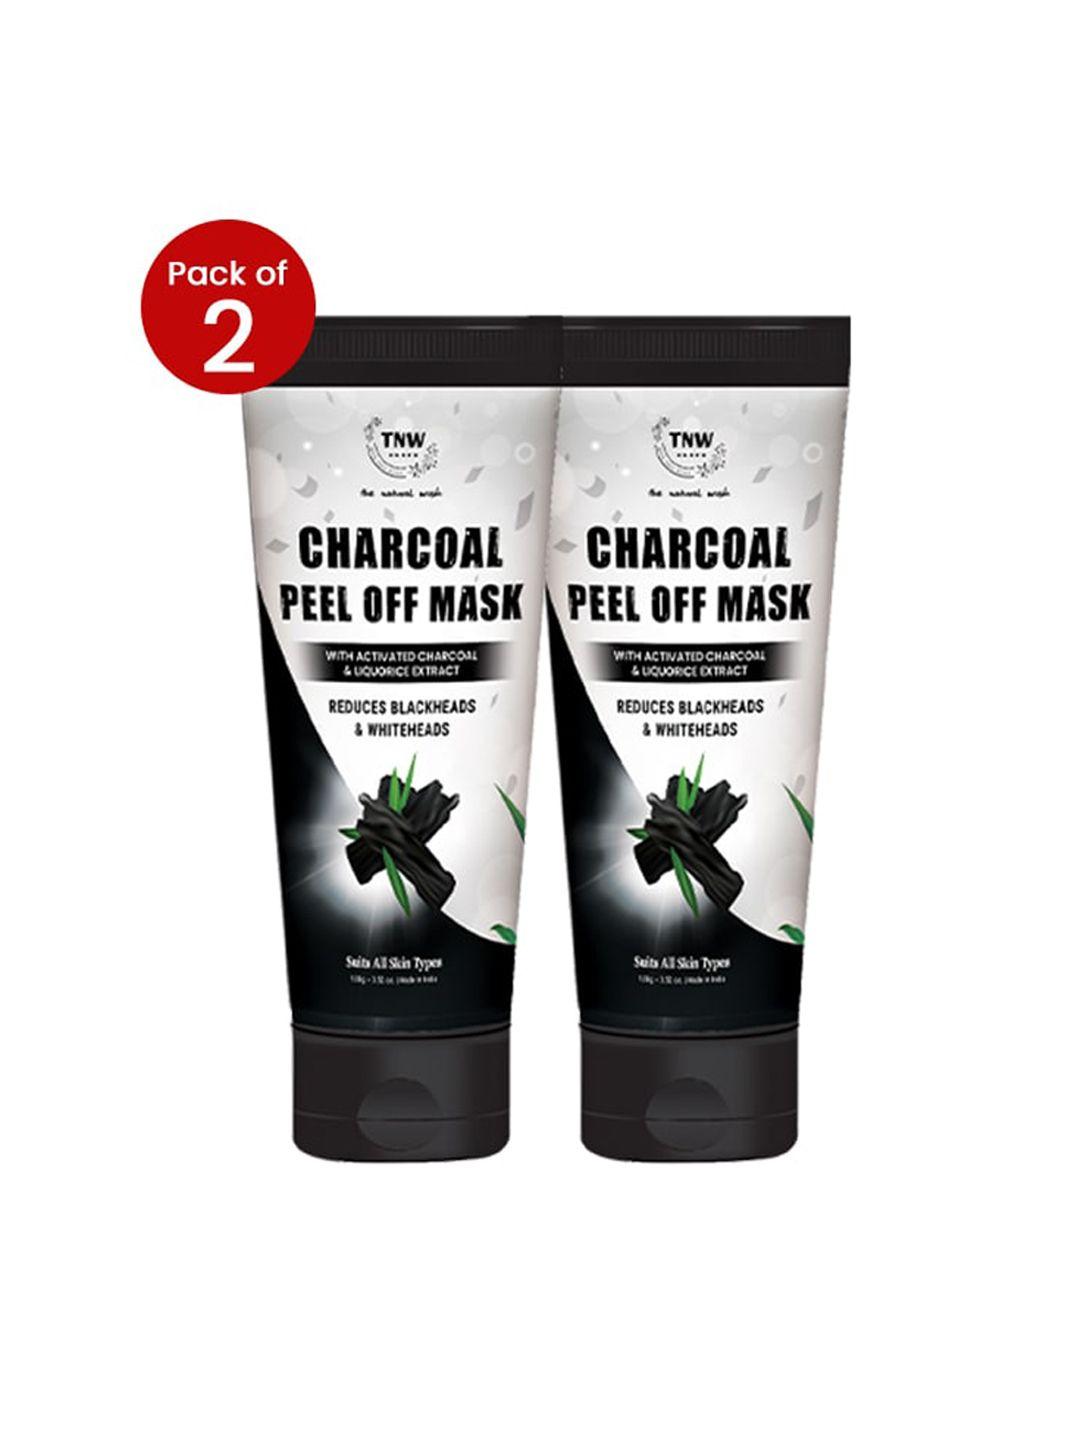 tnw the natural wash set of 2 charcoal peel off mask to reduce blackheads - 100g each